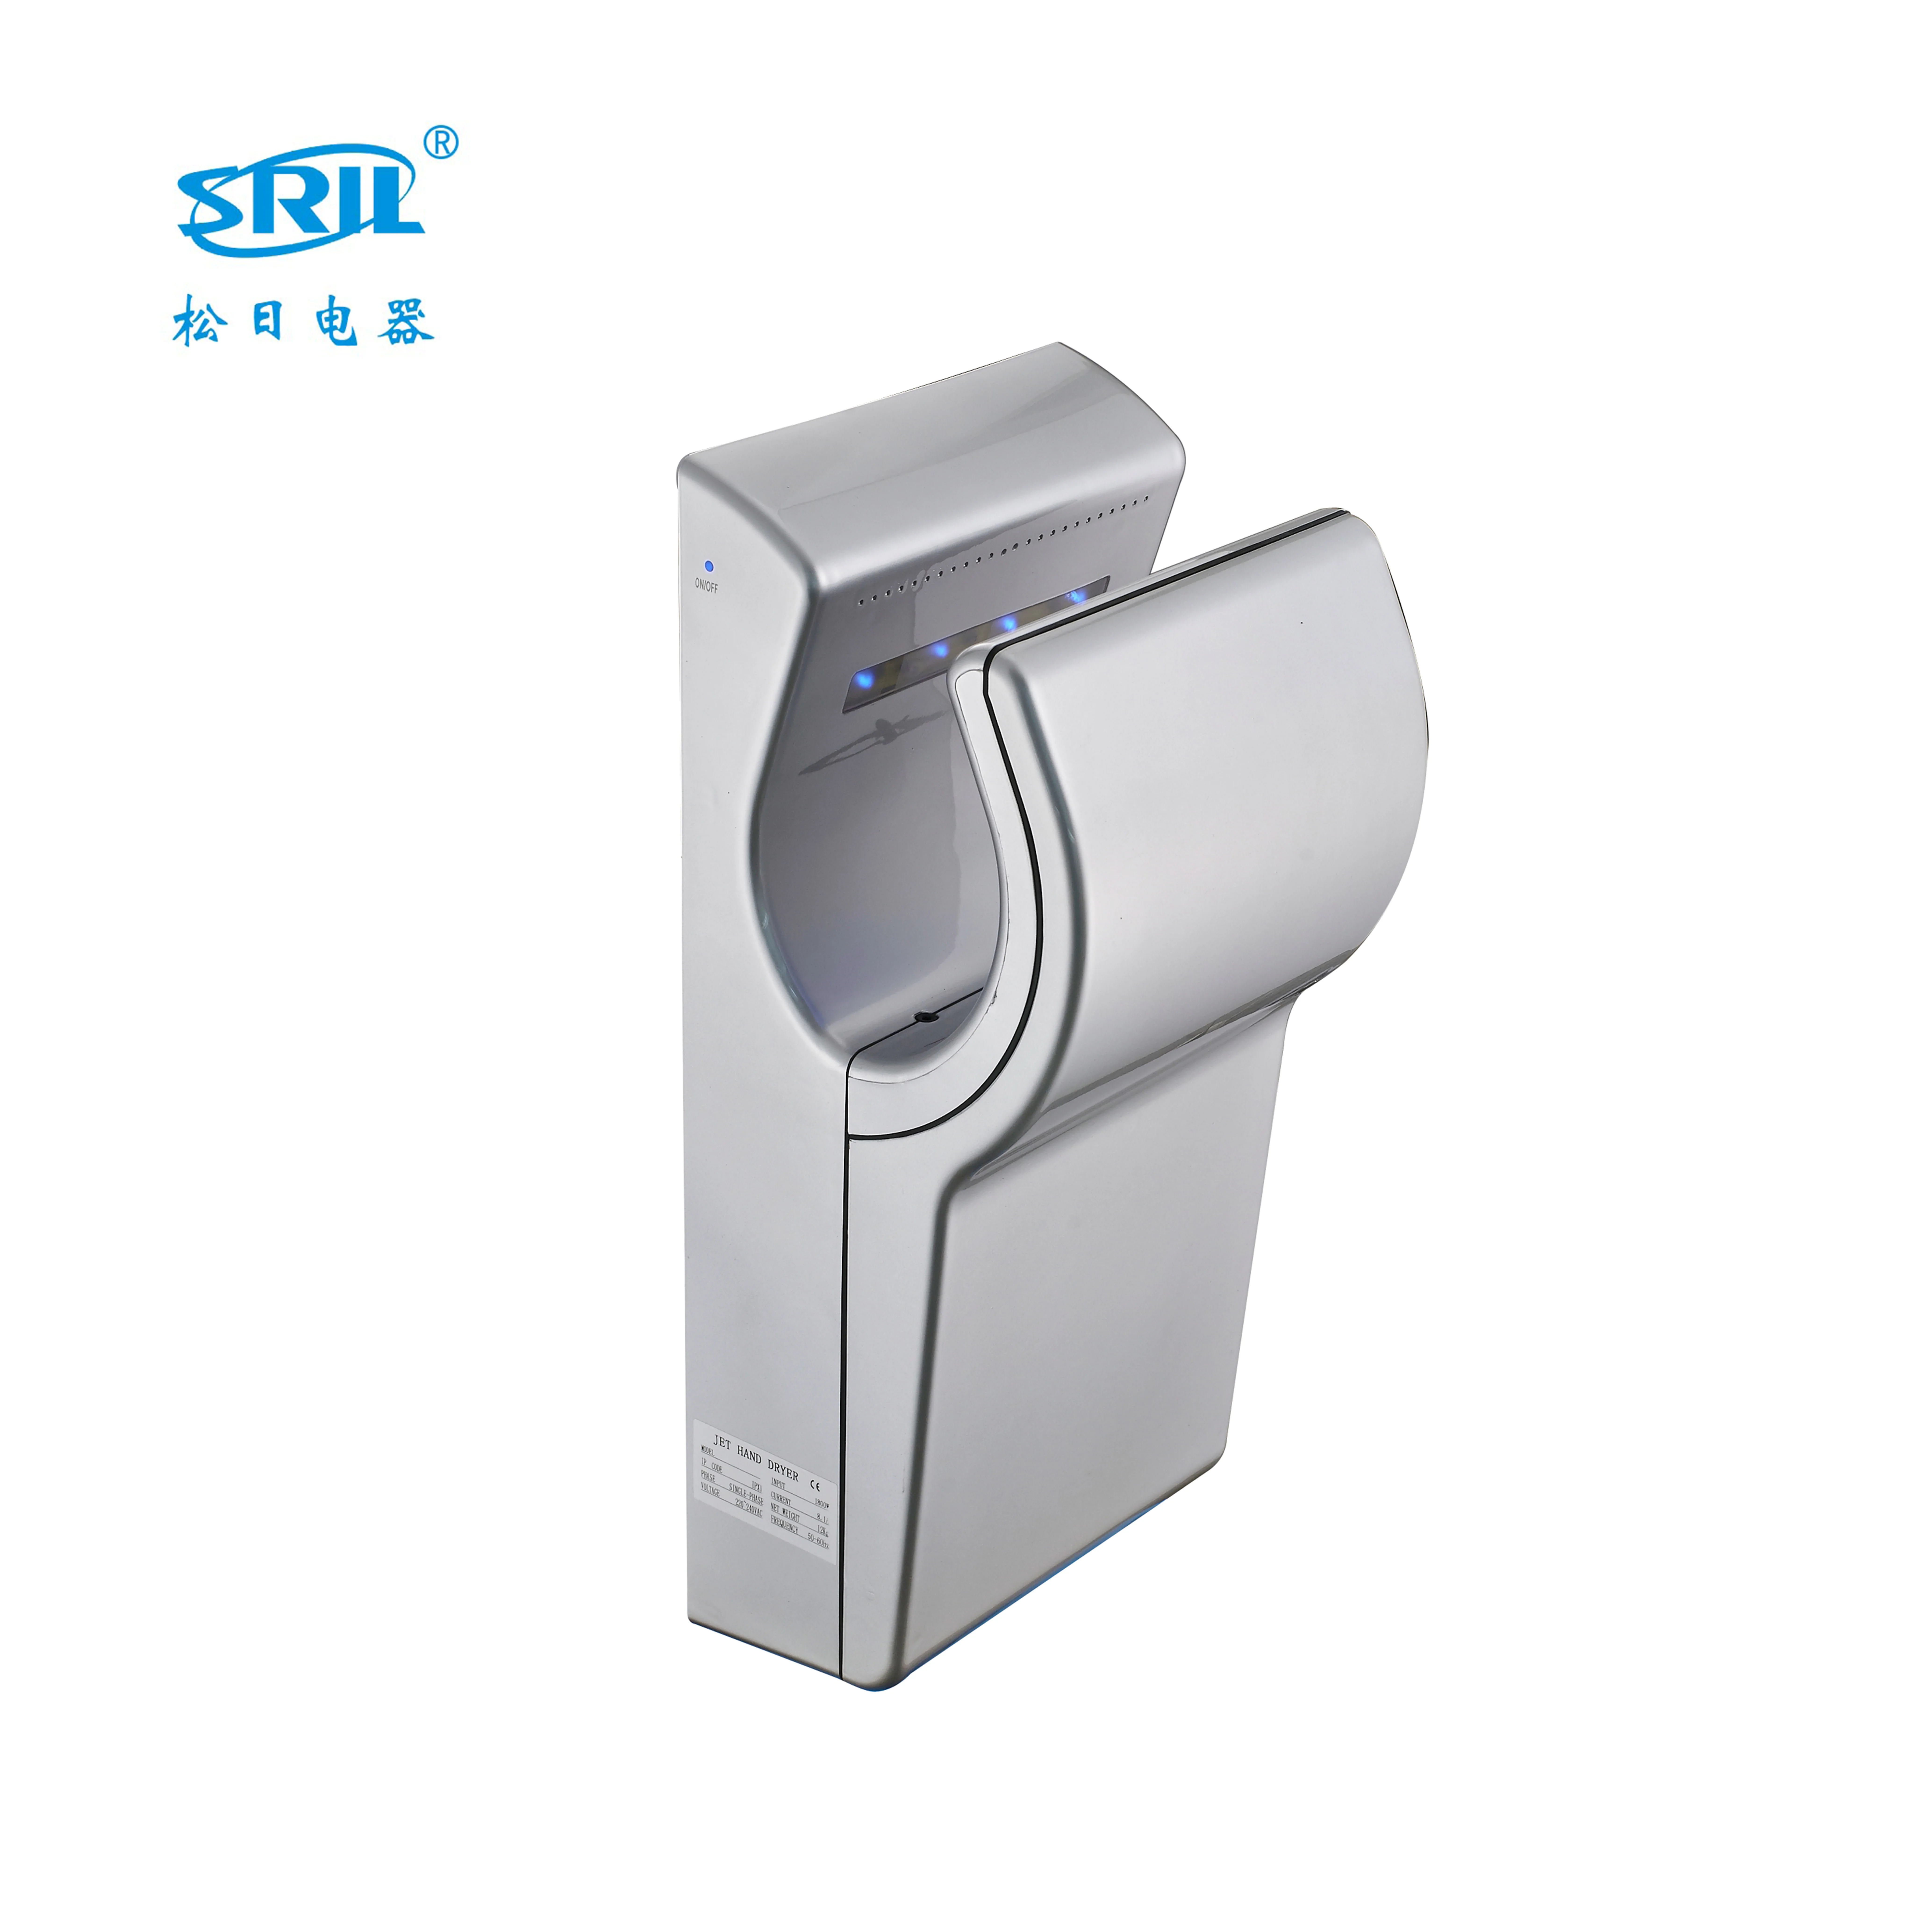 Details about   Automatic Jet Hand Dryer with HEPA Filter 1800W High Speed Commercial Hand Dryer 